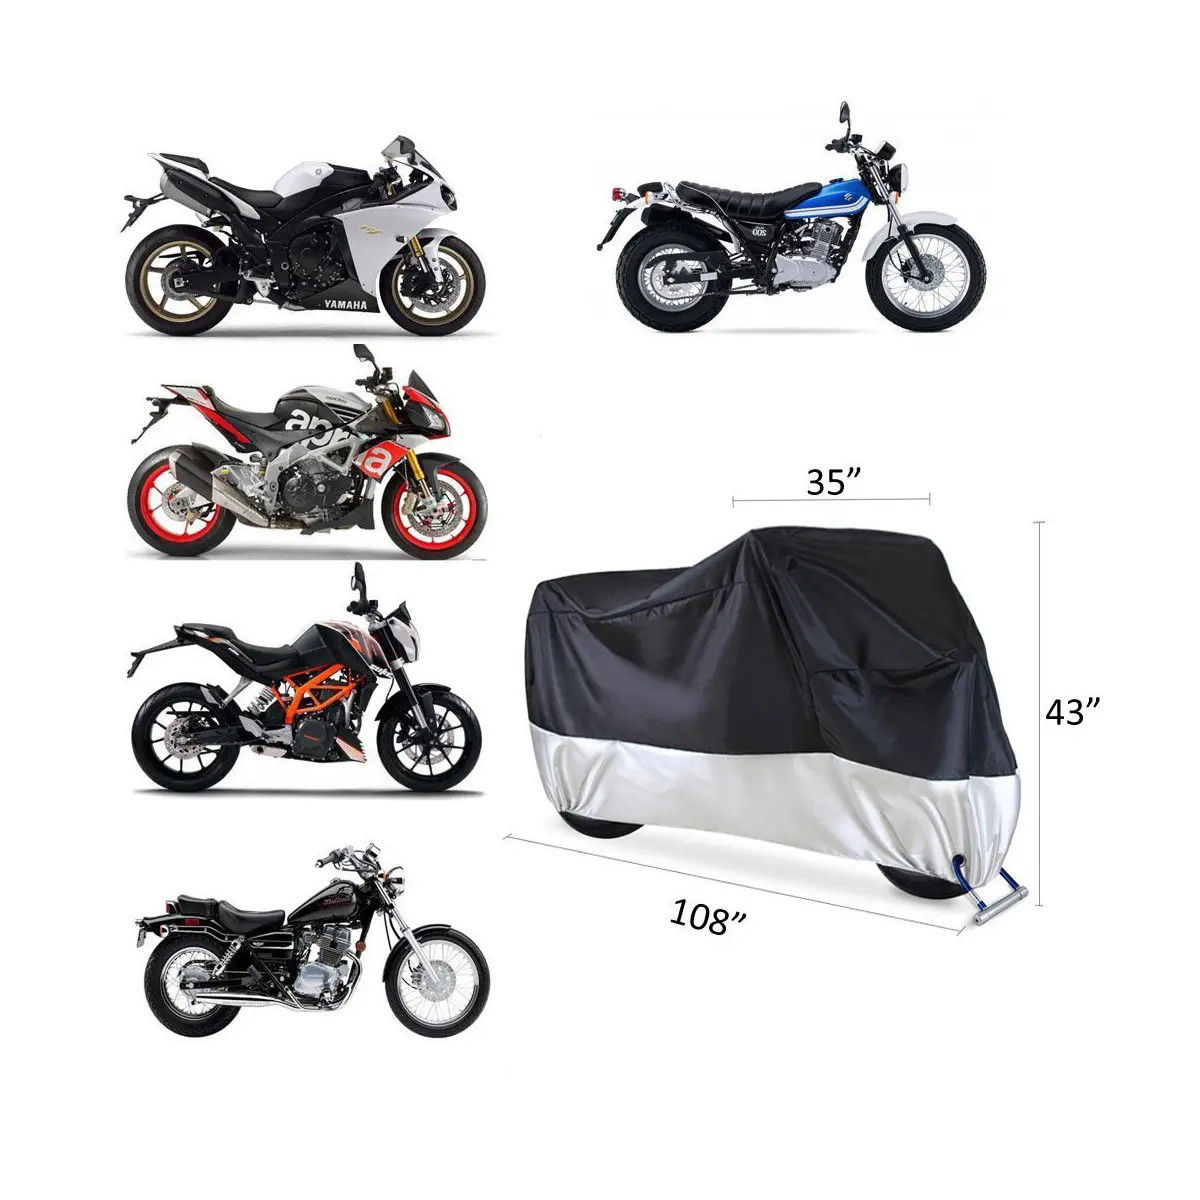 All Season Waterproof Sun Protection Motorcycle Cover fits up to 104" motor